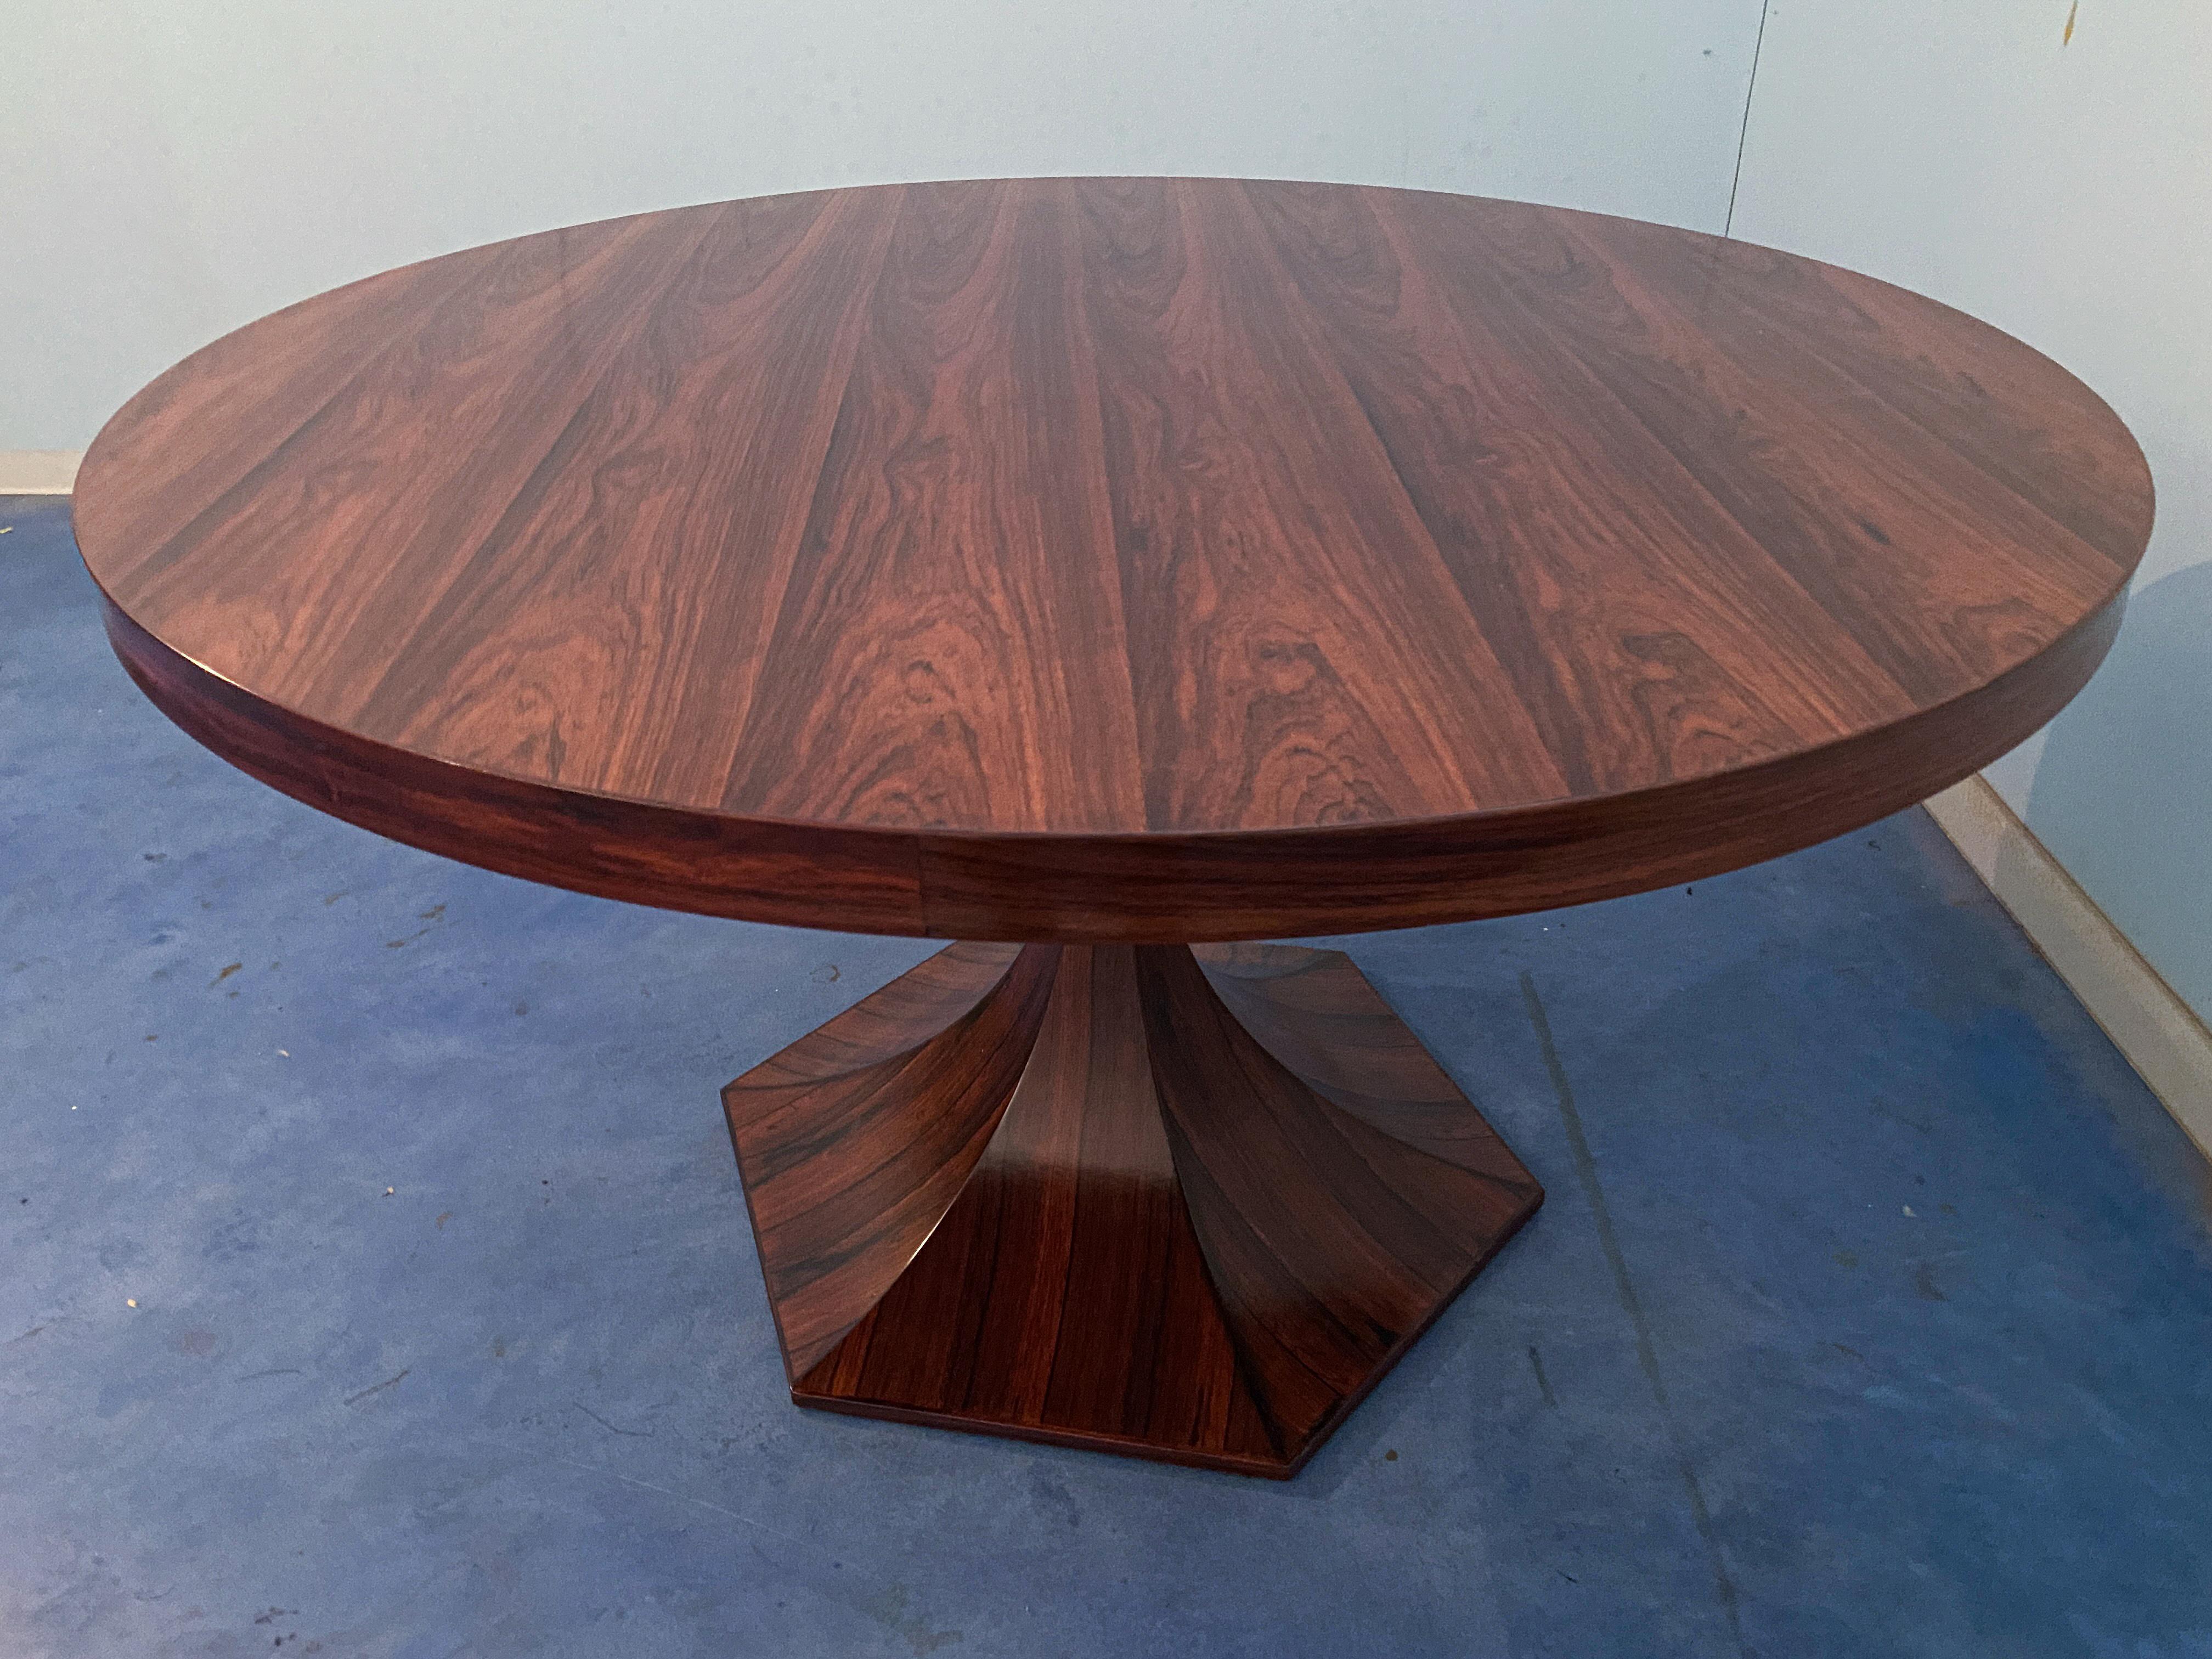 Italian Midcentury Circular Dining Table in Mahogany by Giulio Moscatelli, 1964 For Sale 9